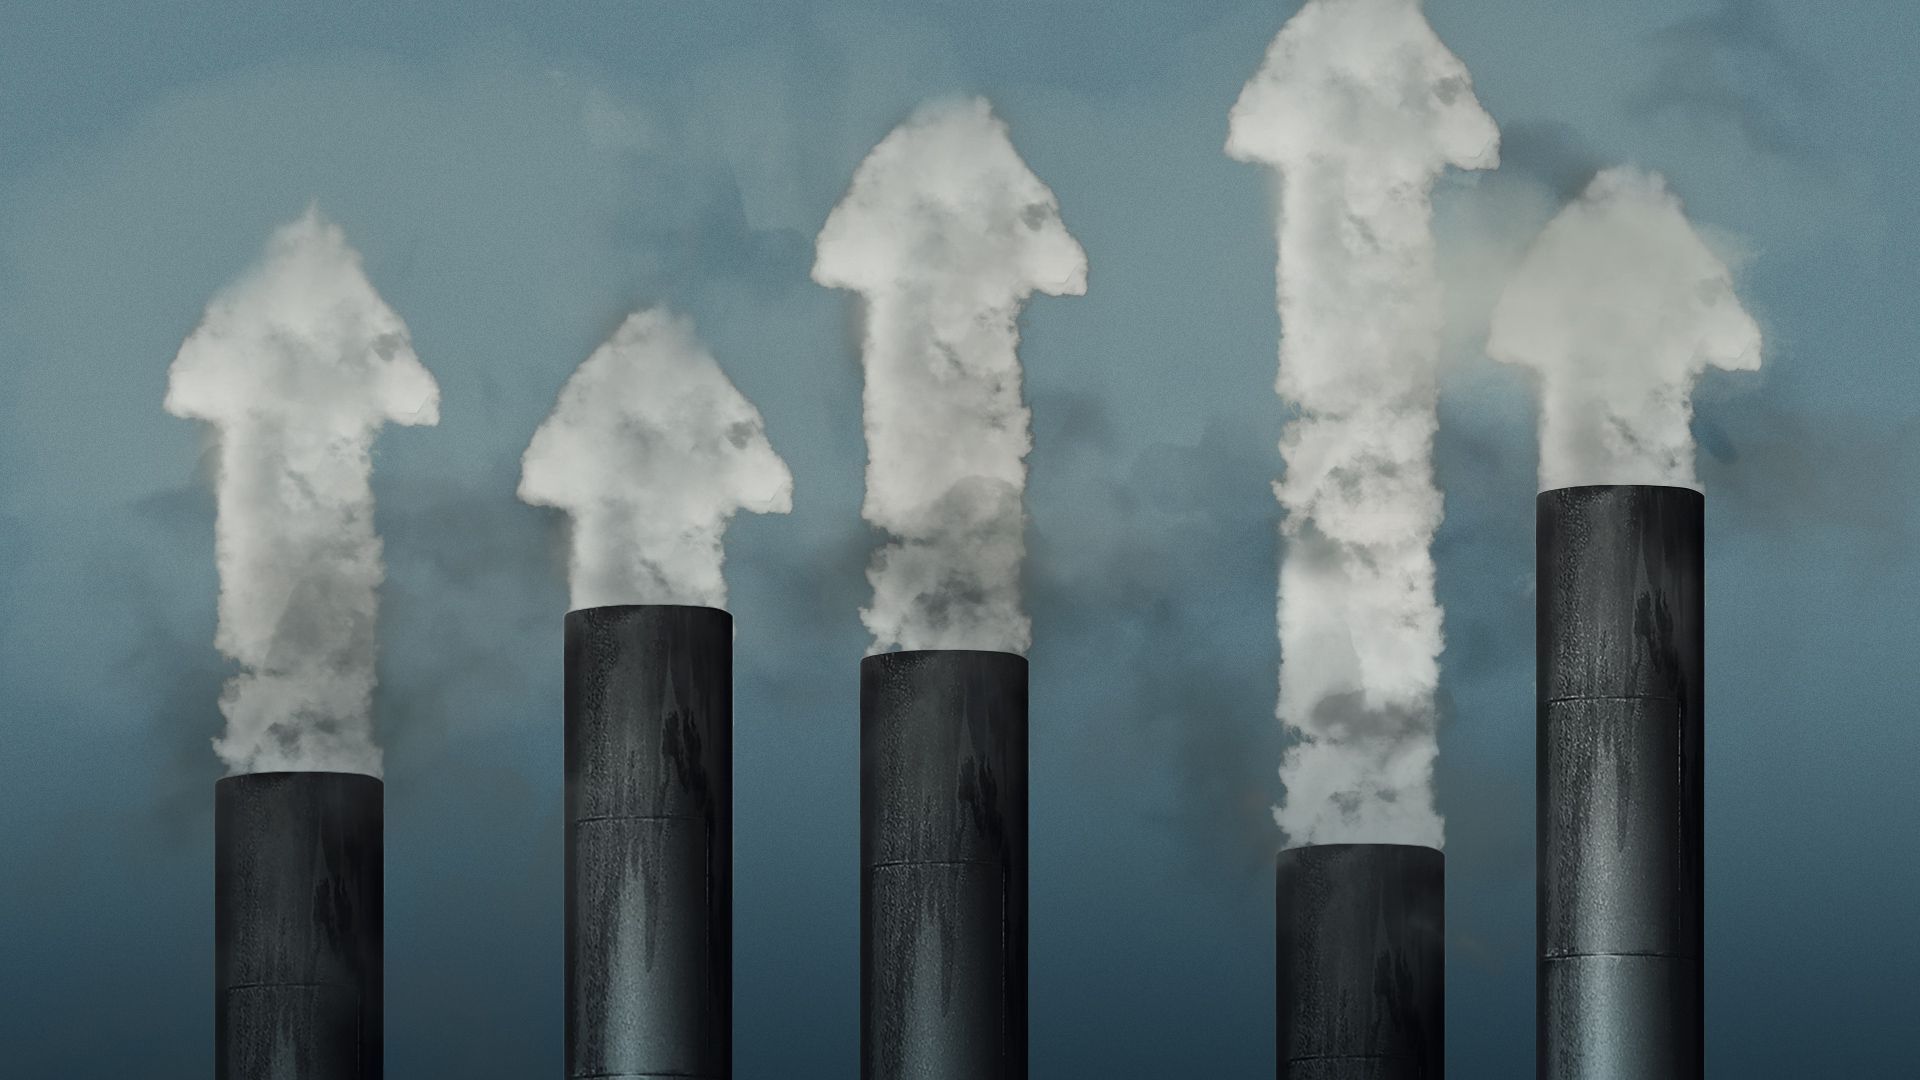 Illustration of smoke stacks with fumes in the shape of upward arrows coming out.